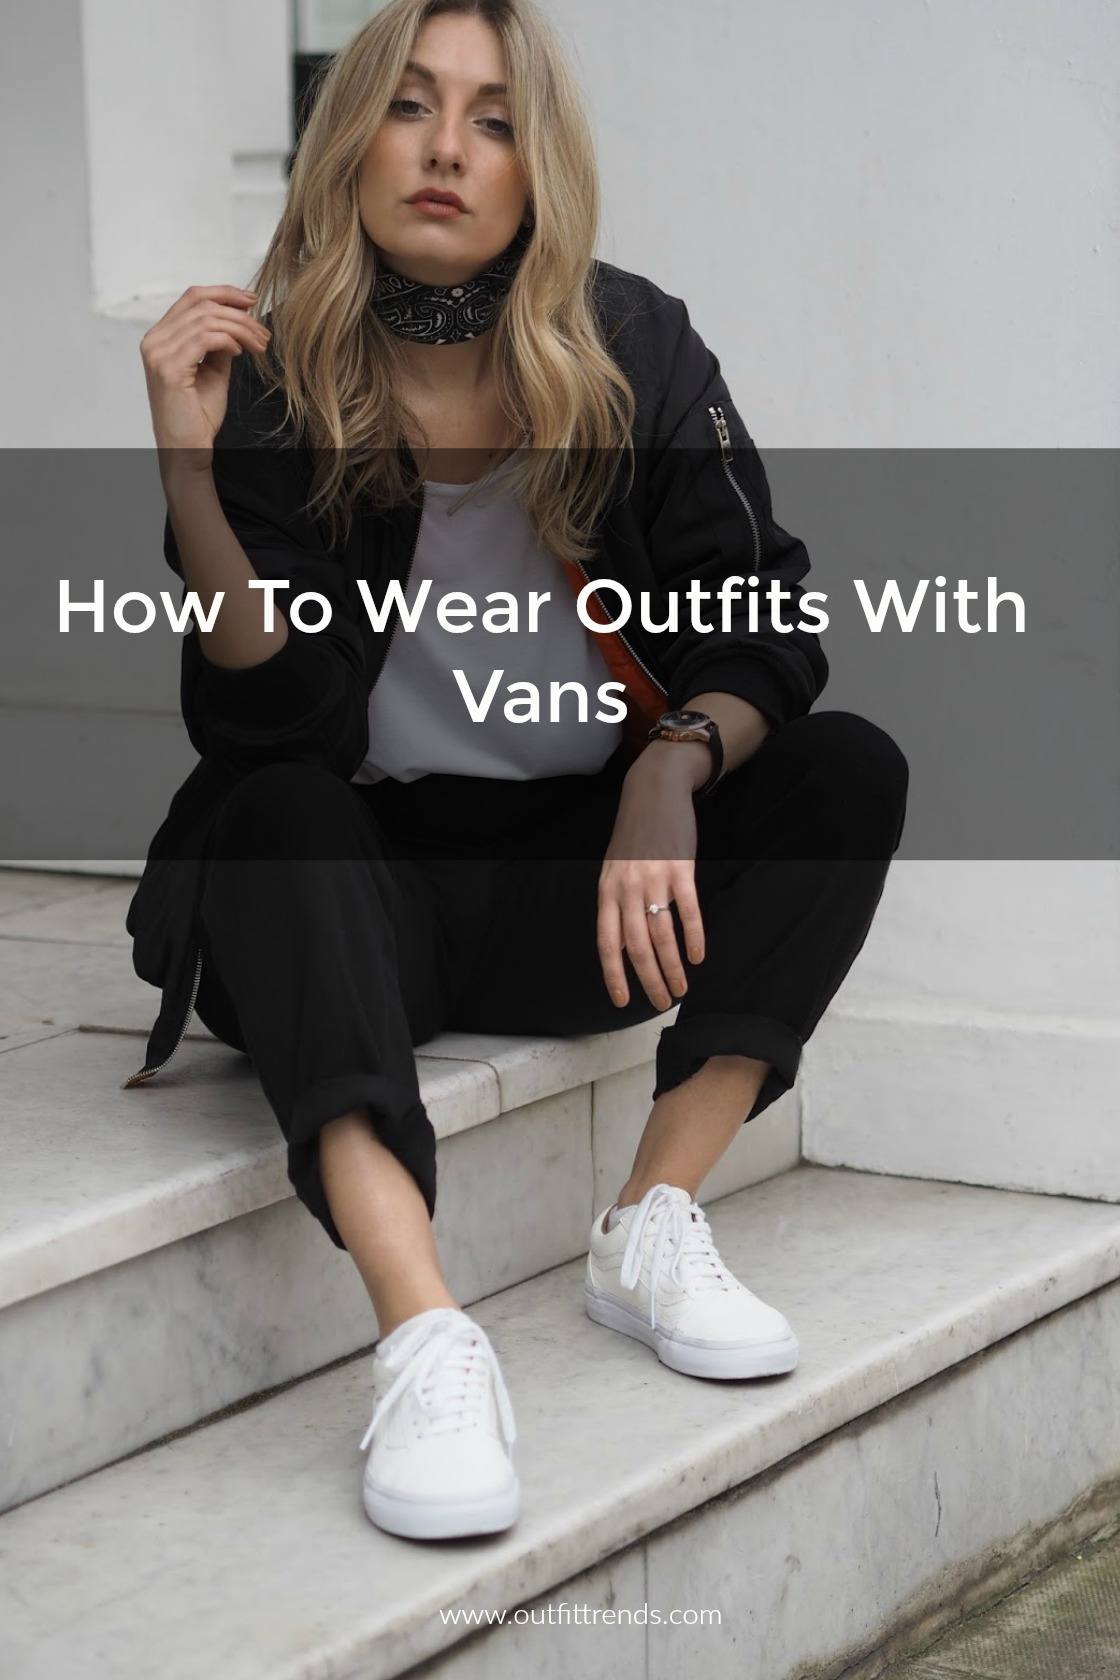 Manga Mm entusiasta Women's Outfits with Vans-30 Outfits to Wear with Vans Shoes